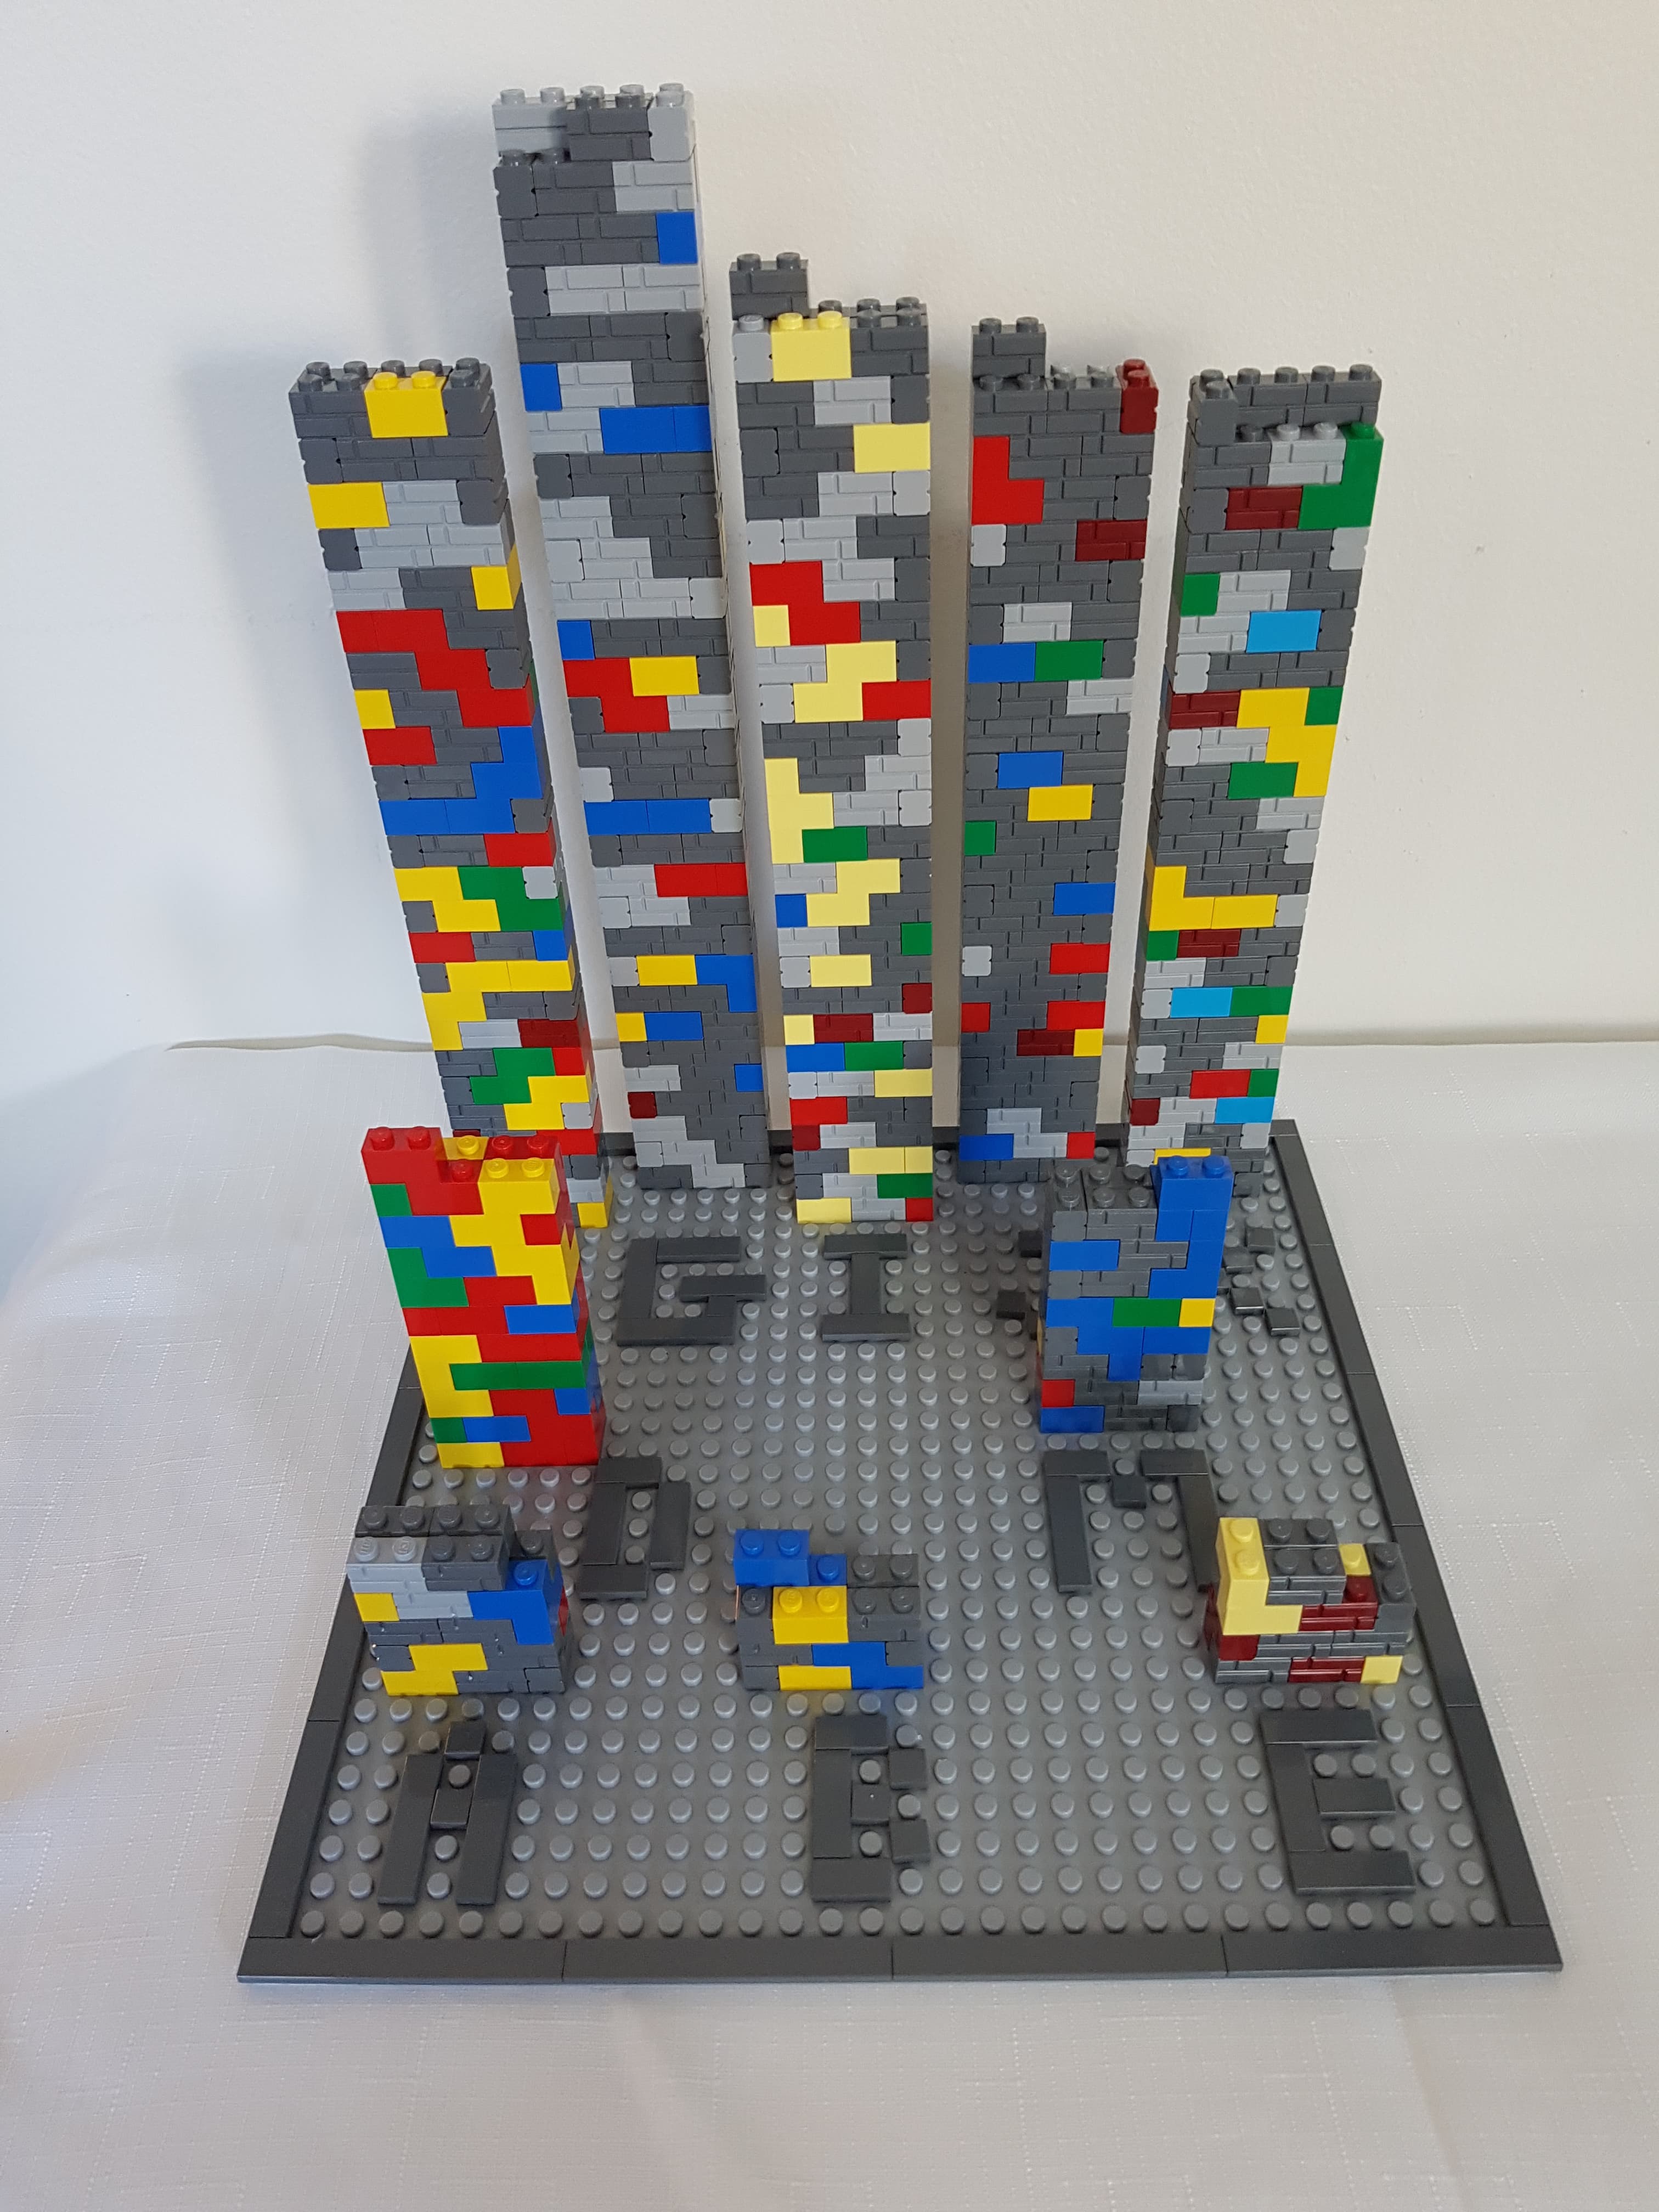 Image of ten towers of varying sizes made from multicolored Lego bricks. Each tower is labeled with a letter that refers to the participant's code name.